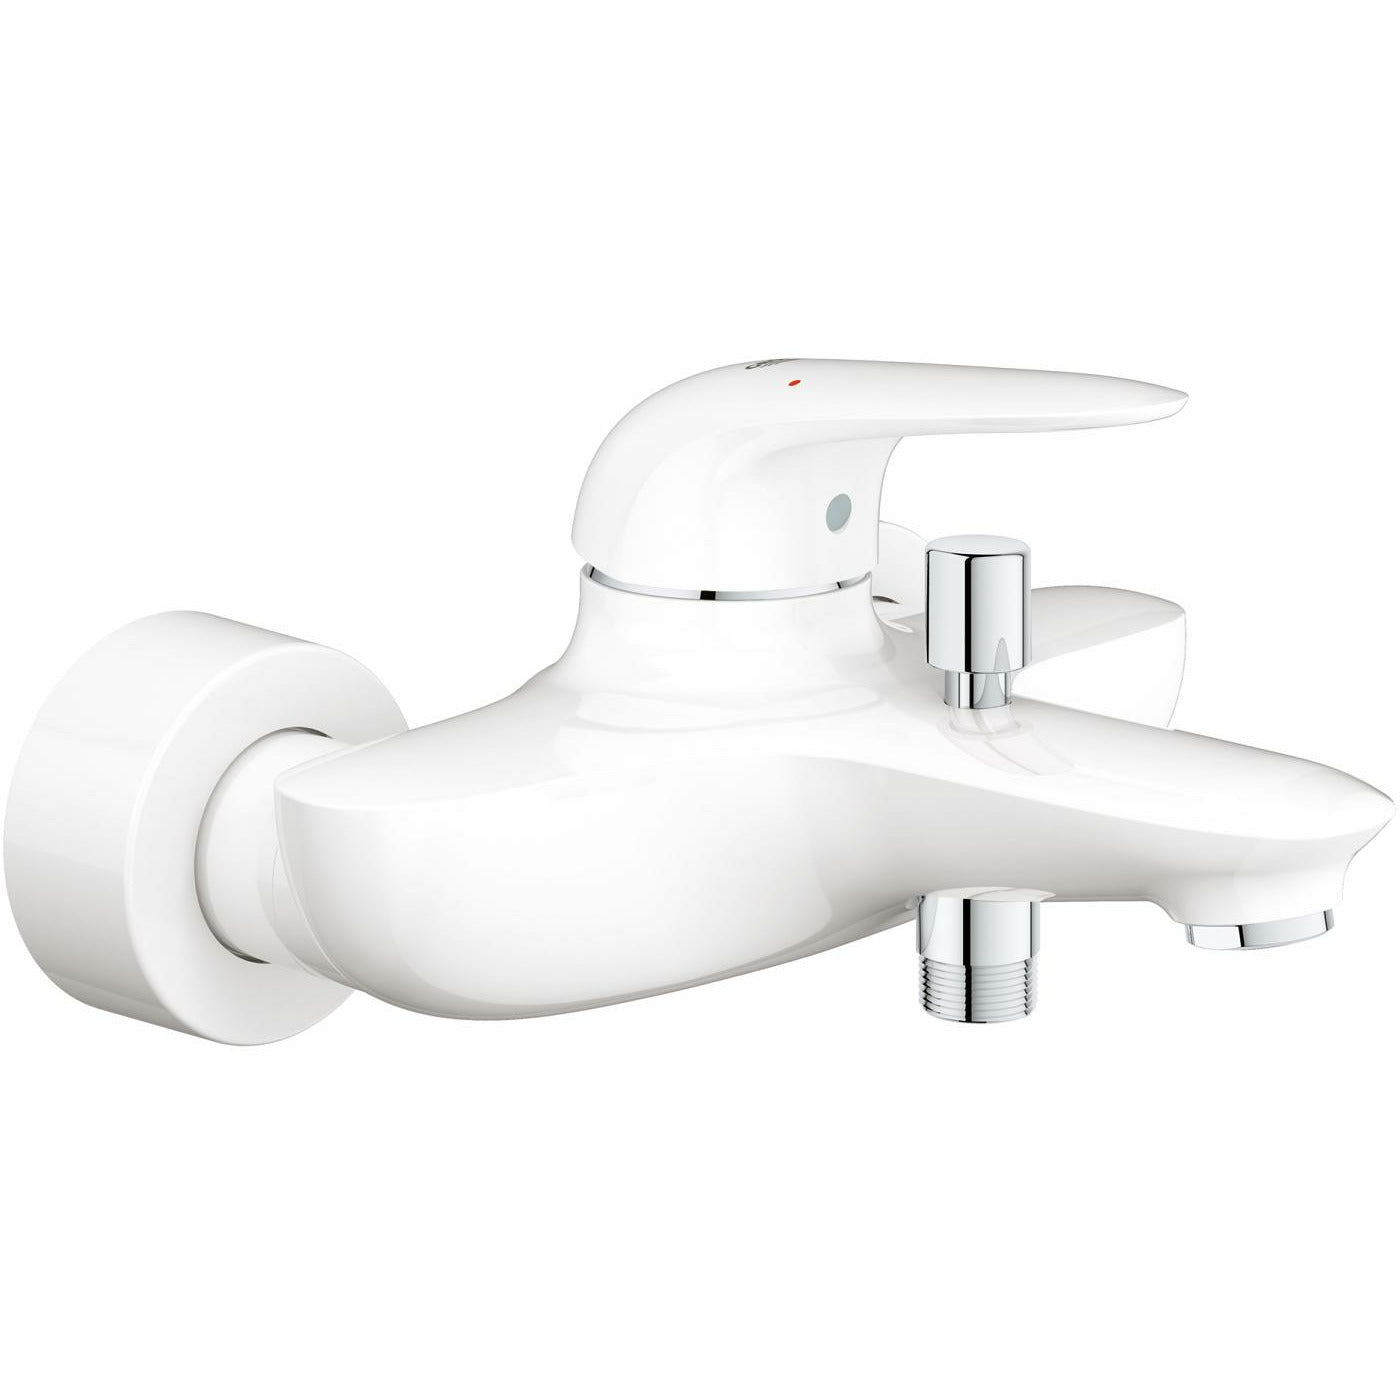 Grohe Wall Mounted Moon White Eurostyle Single-lever bath/shower mixer 1/2" - Letta London - 